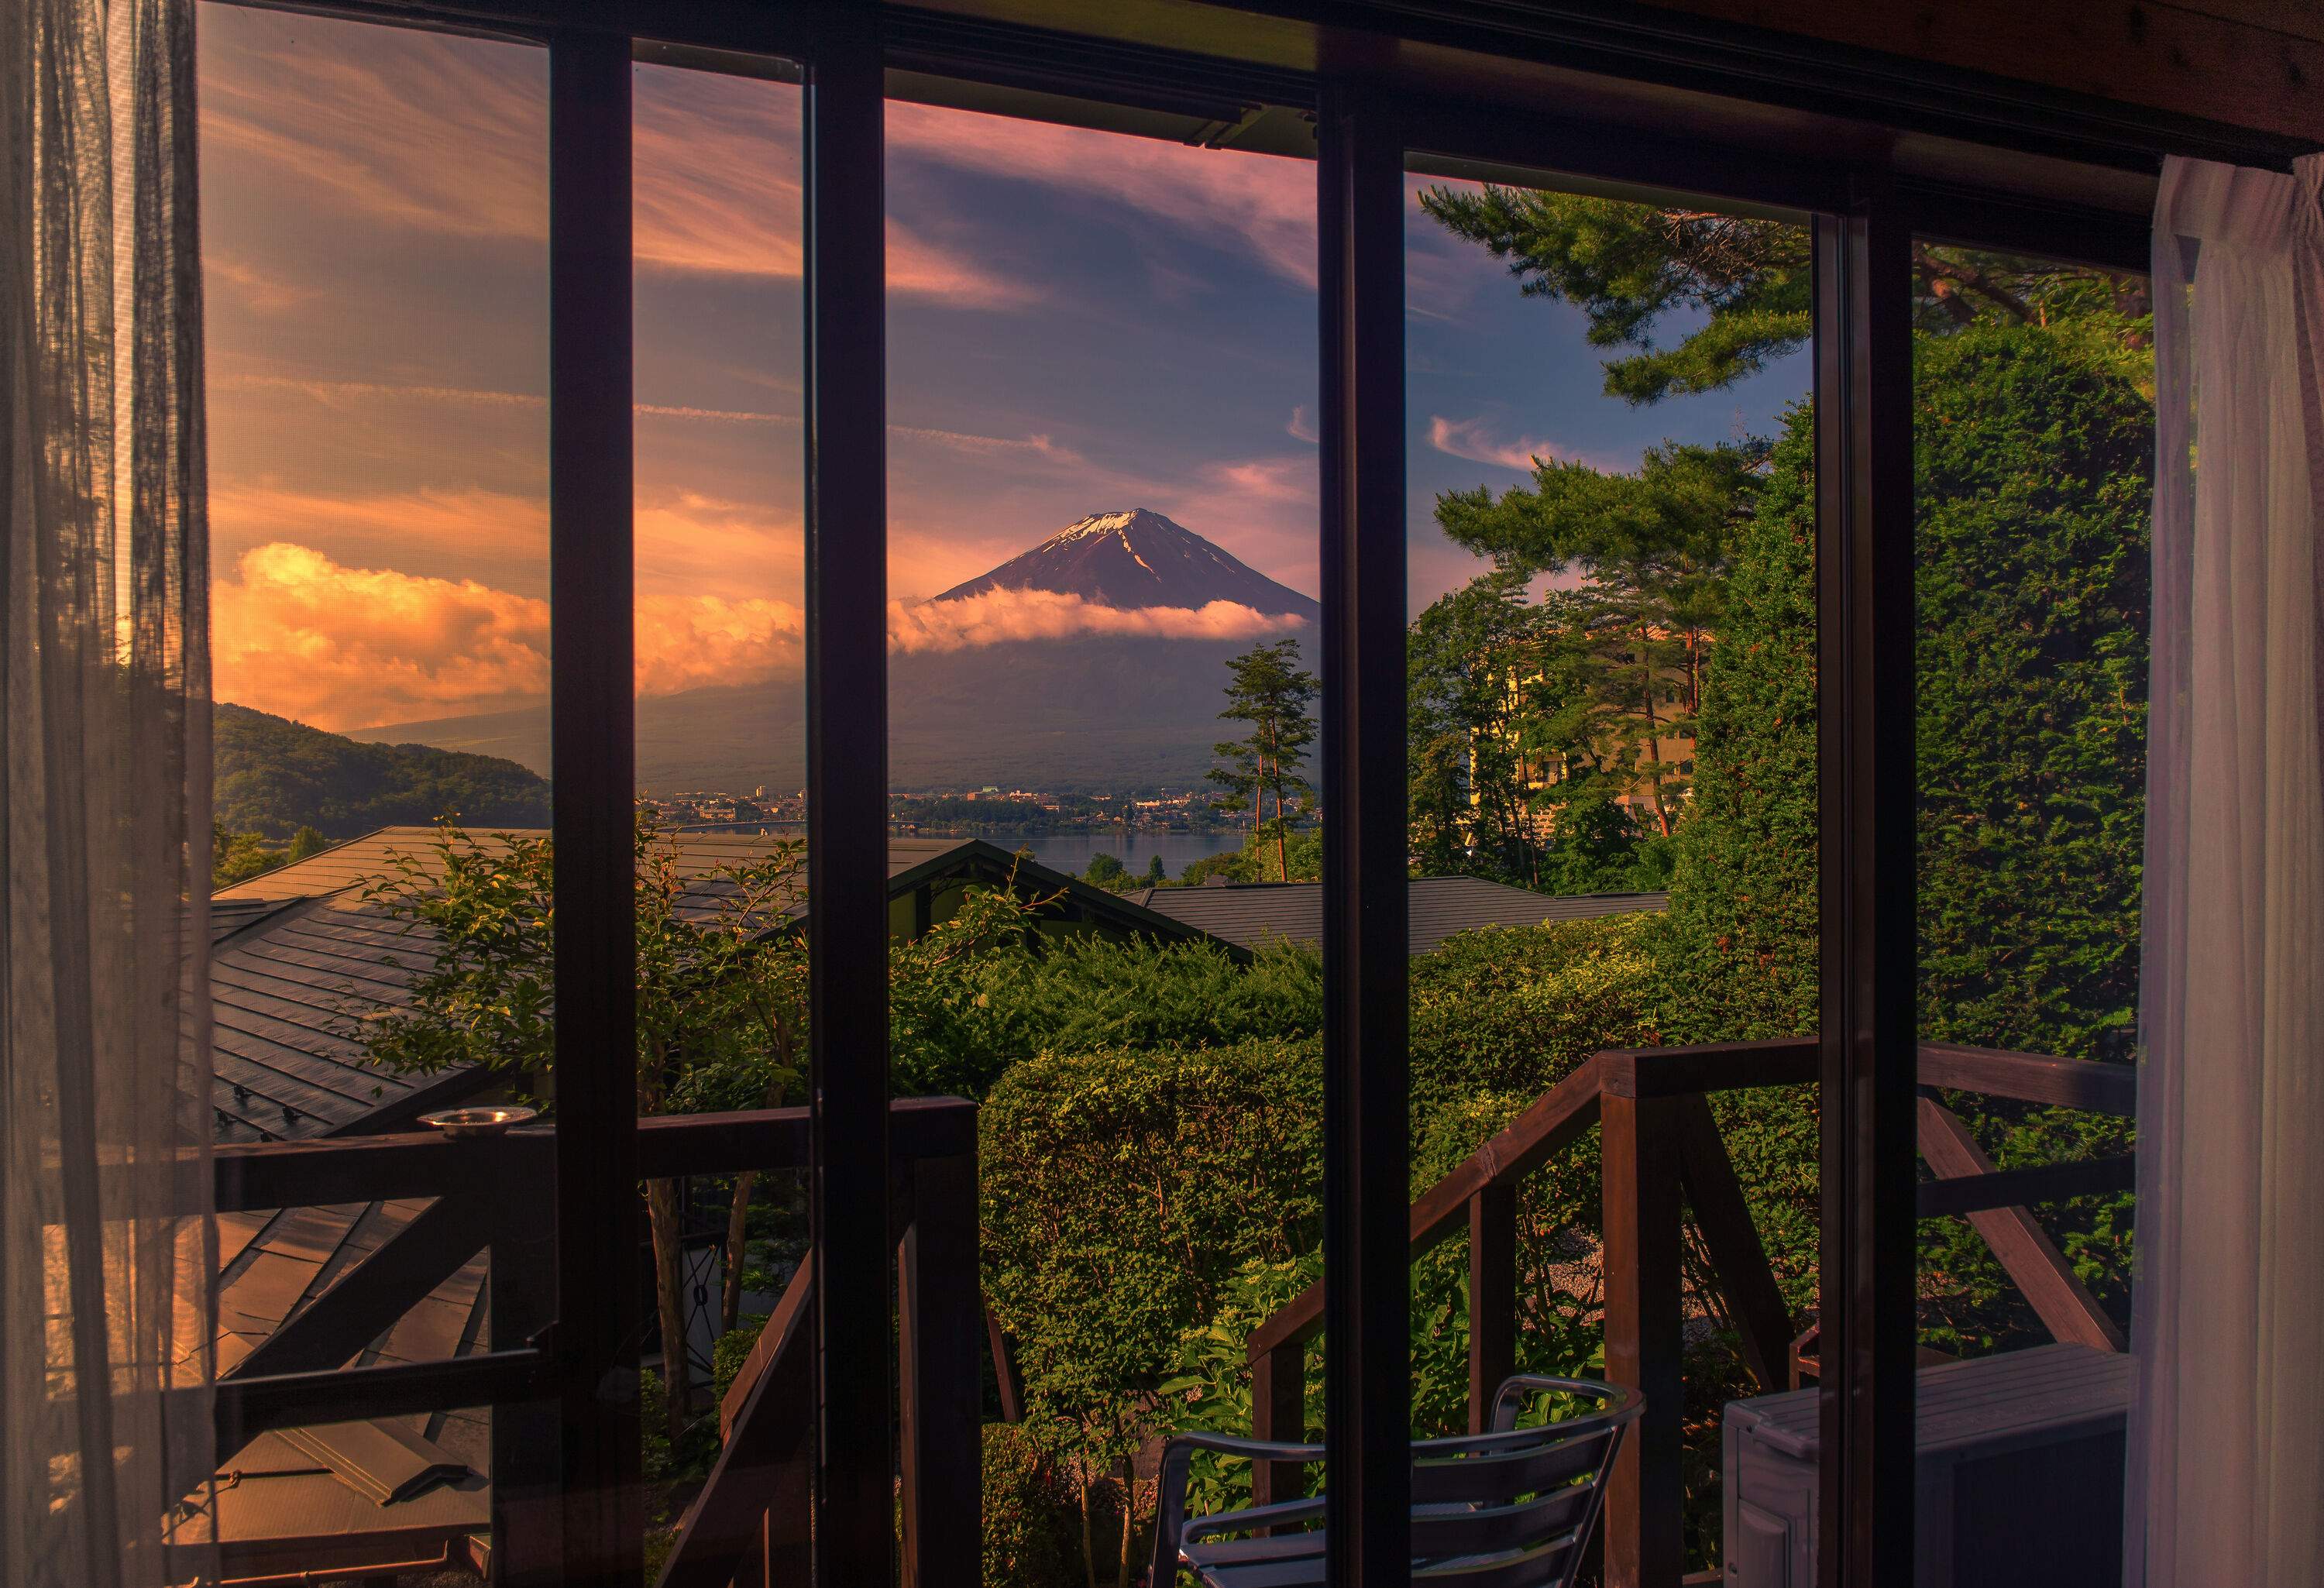 Peaceful scenery of Mount Fuji against the scenic twilight sky seen from a room's window.